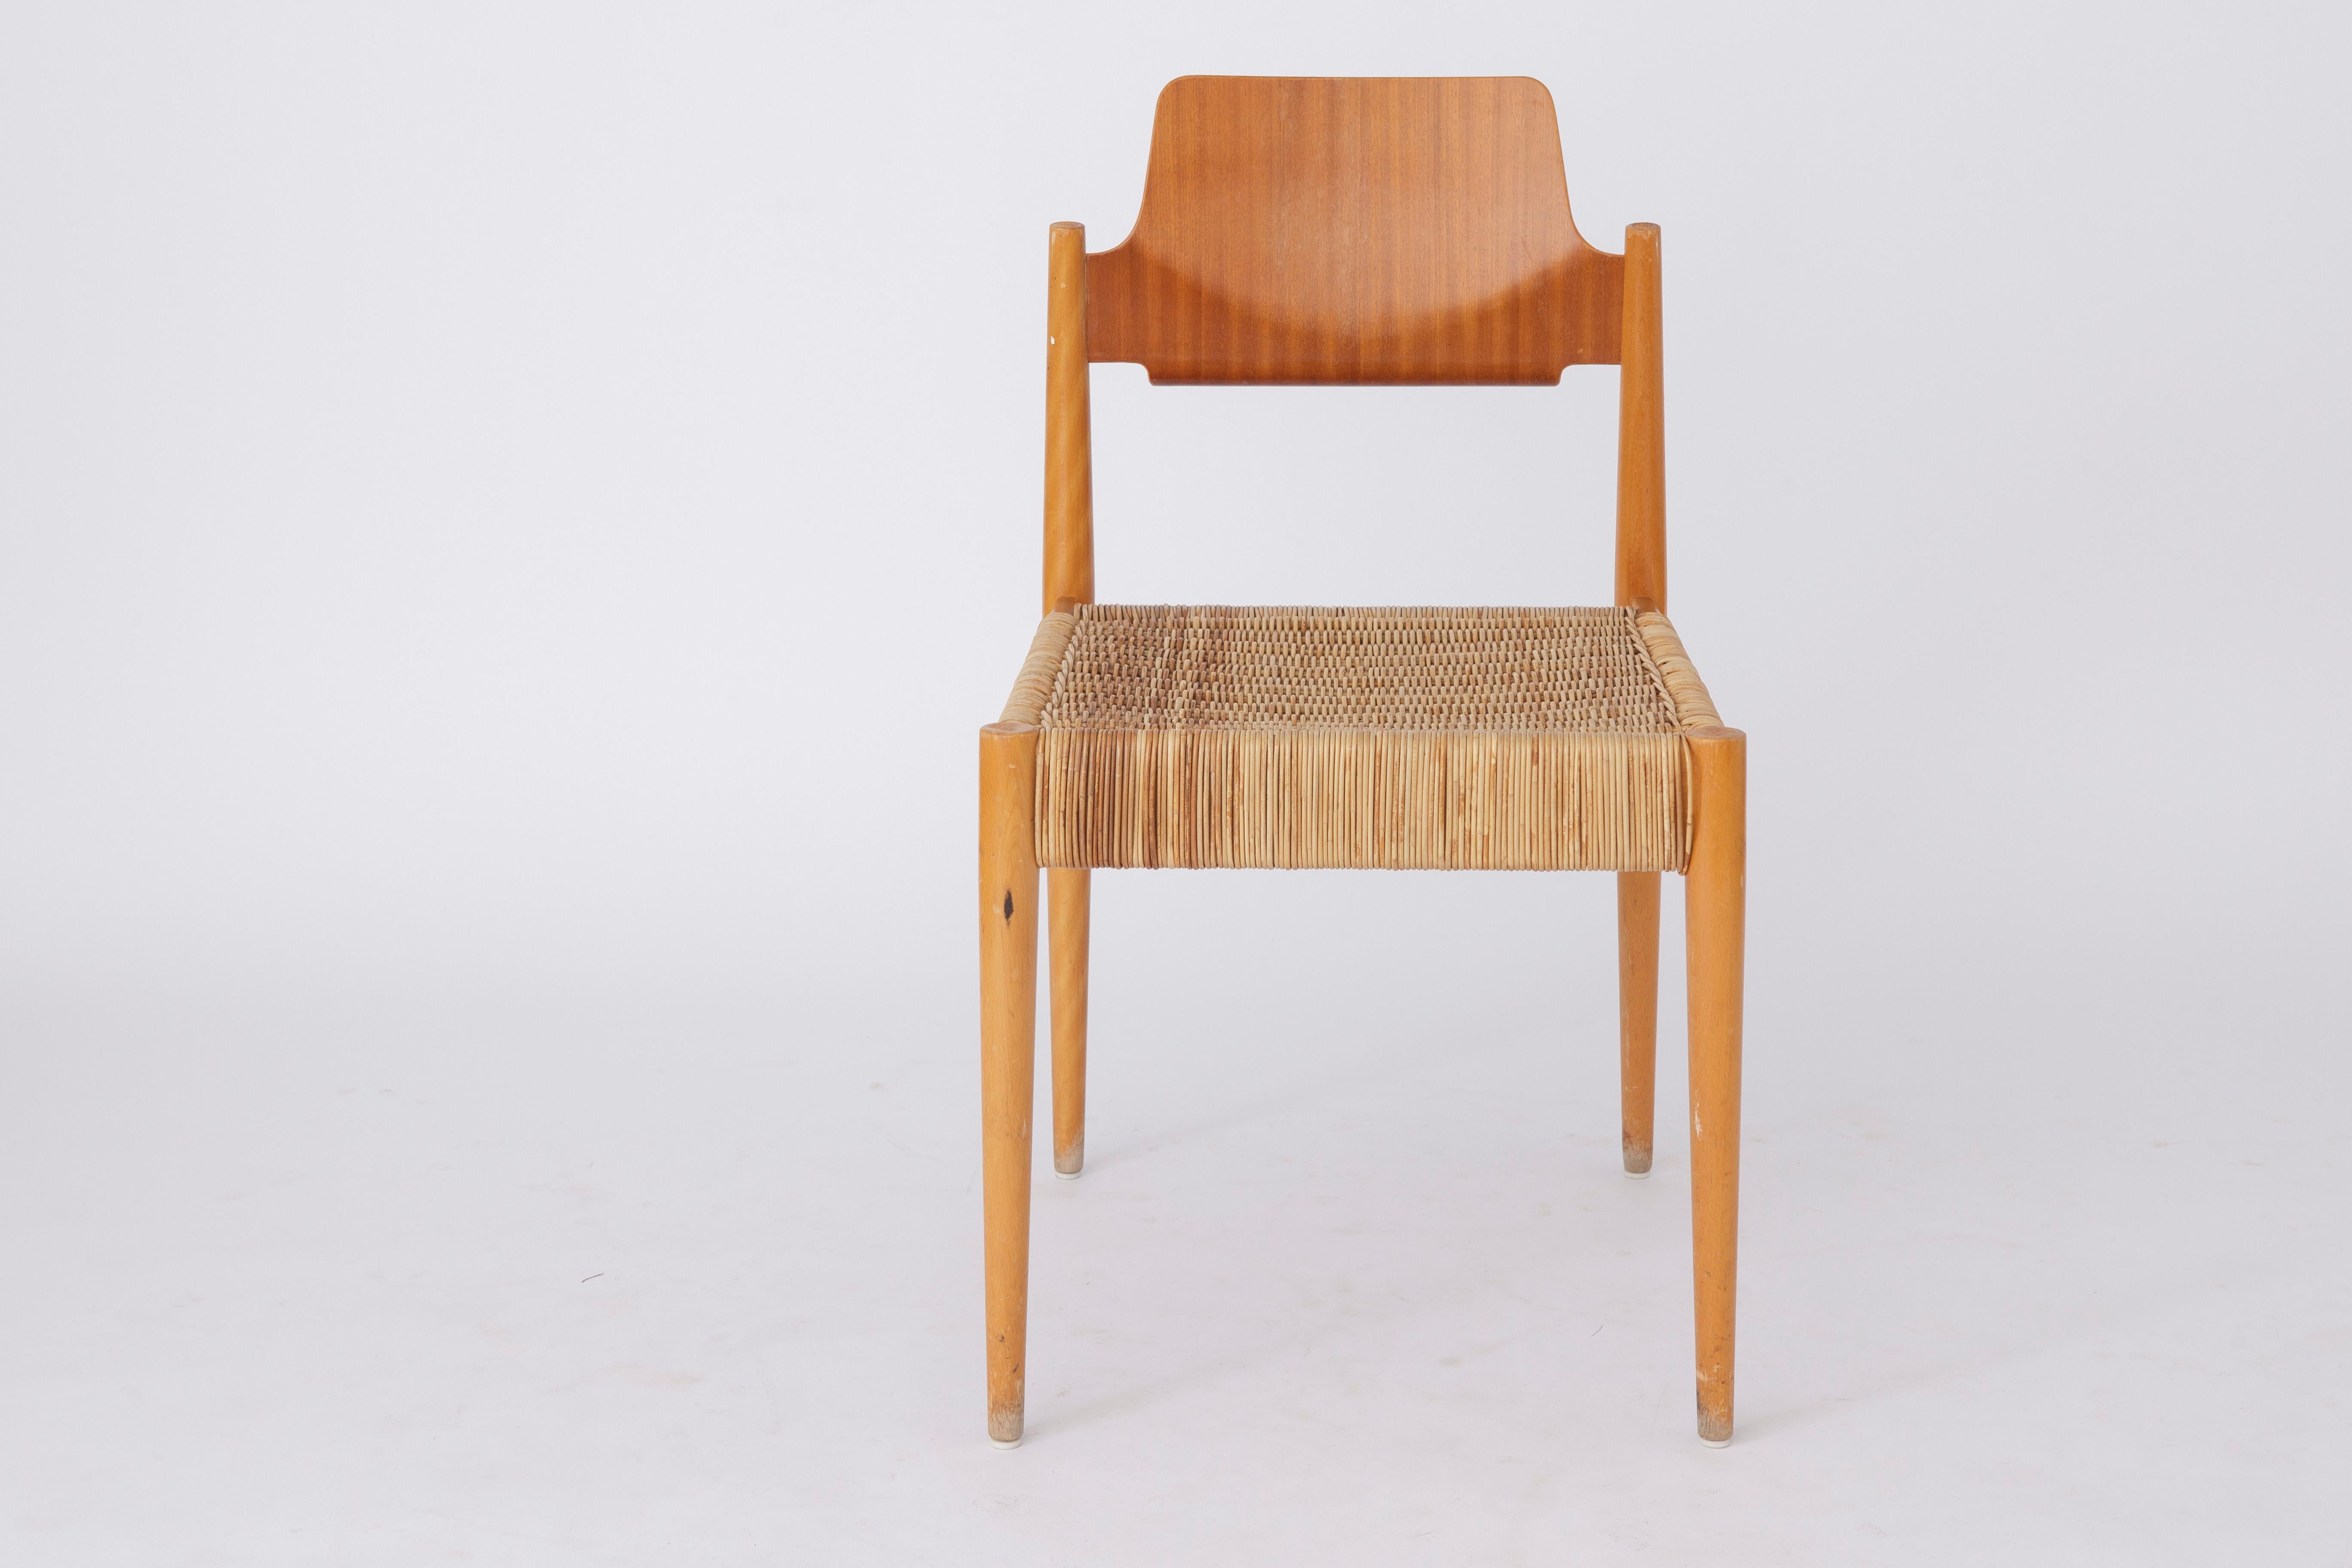 Polished 6 Chairs Egon Eiermann Chairs #SE19 Bauhaus Germany 1950s Vintage For Sale